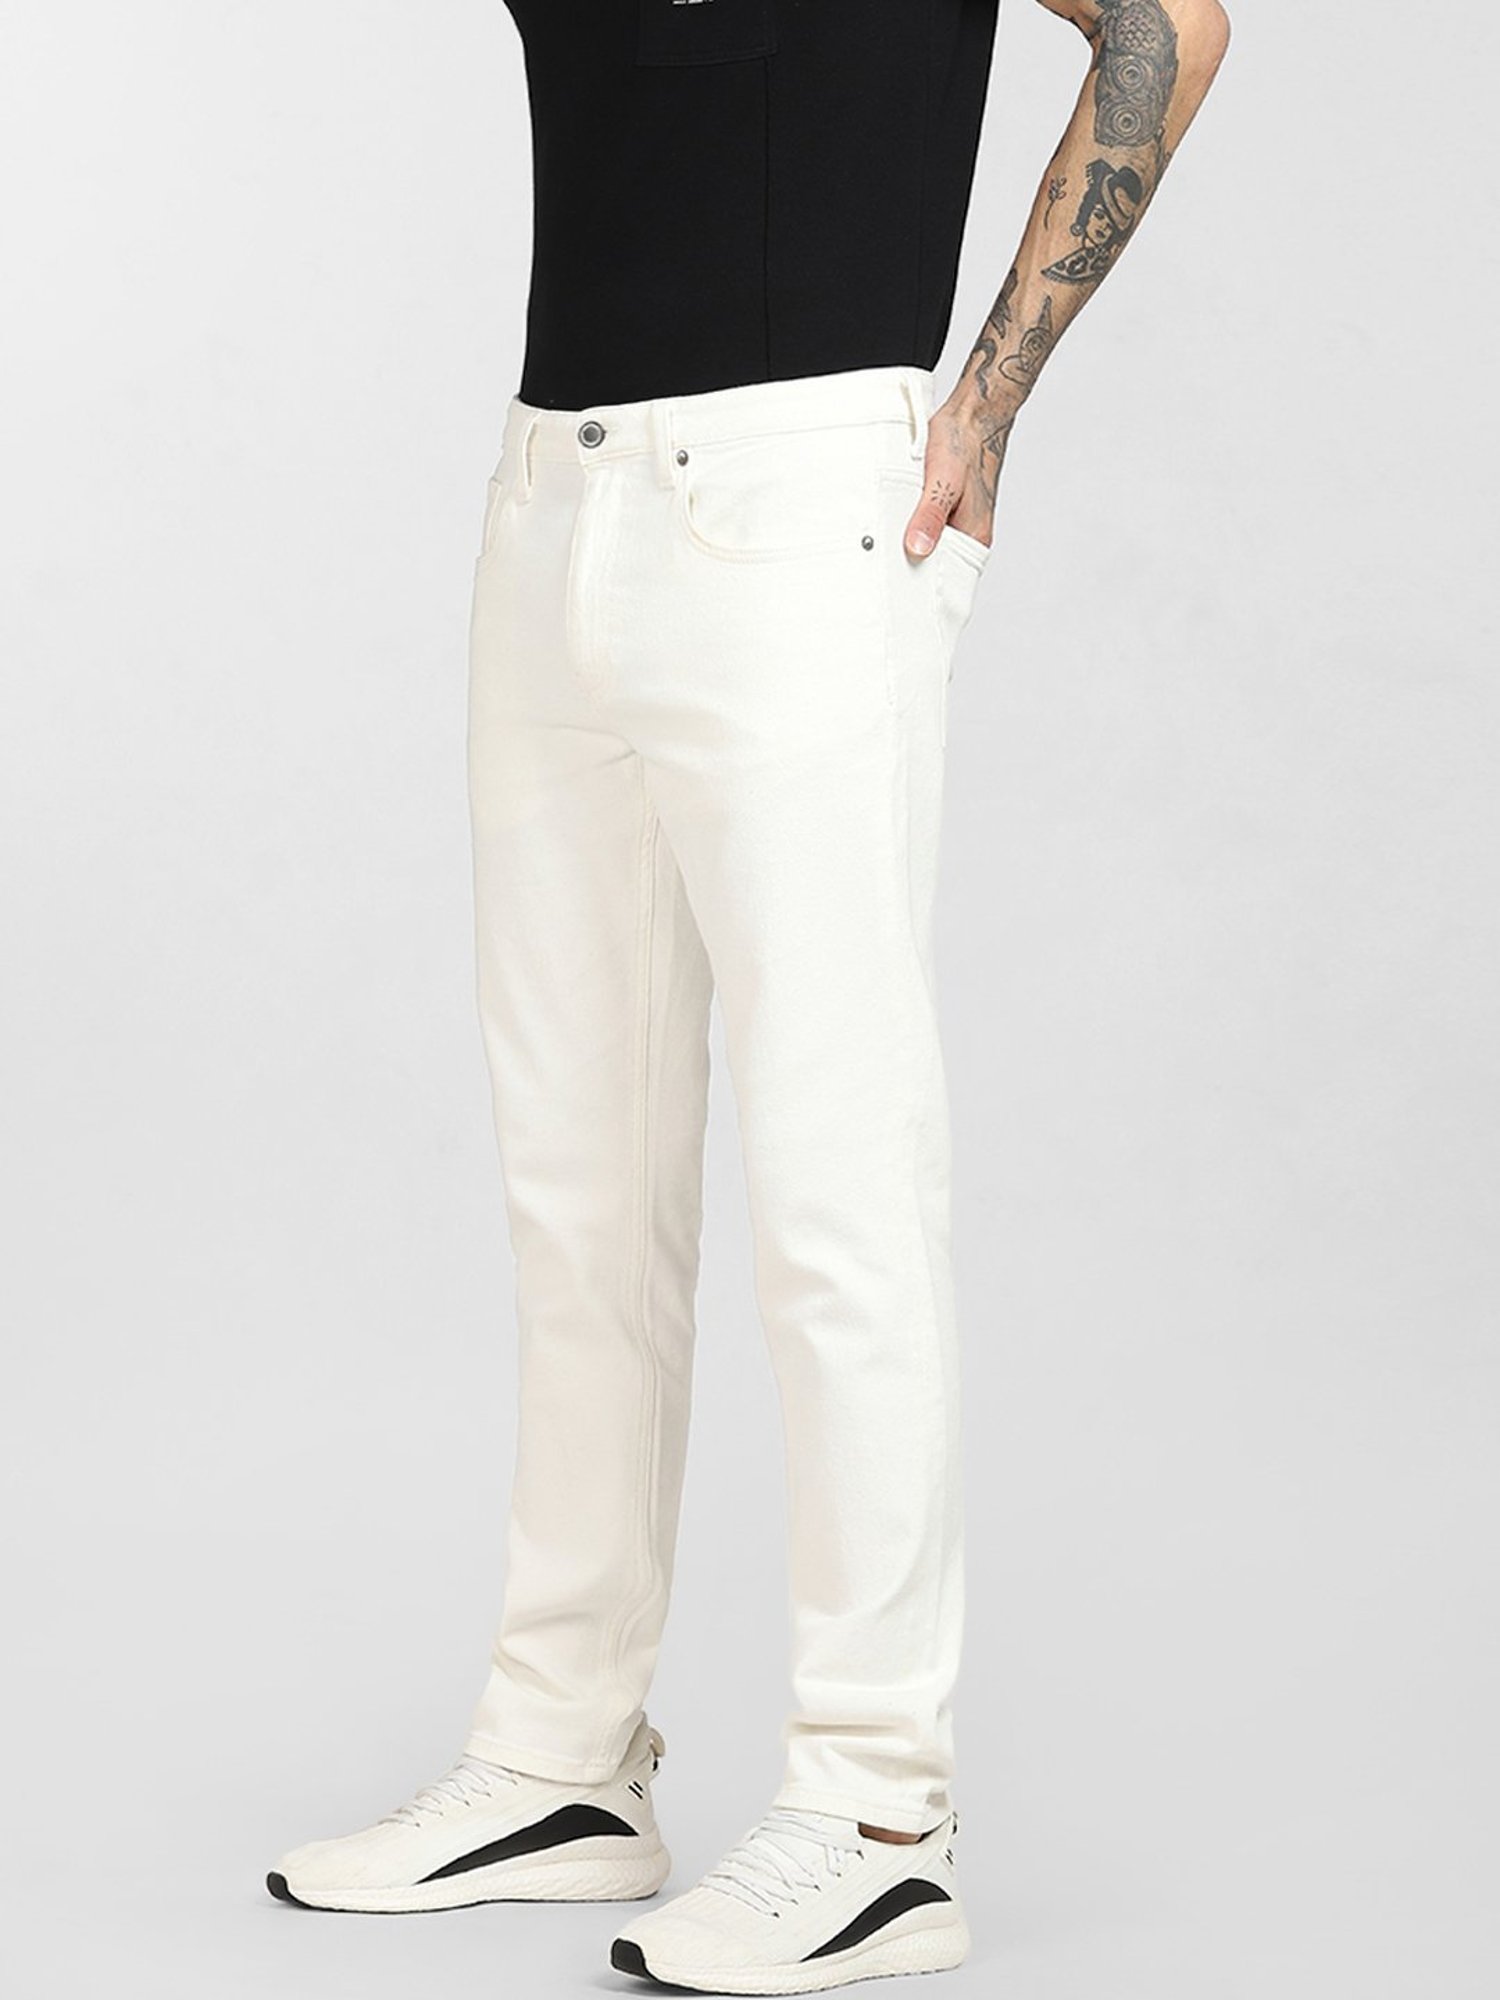 White Skinny Jeans for Men  Up to 77 off  Lyst